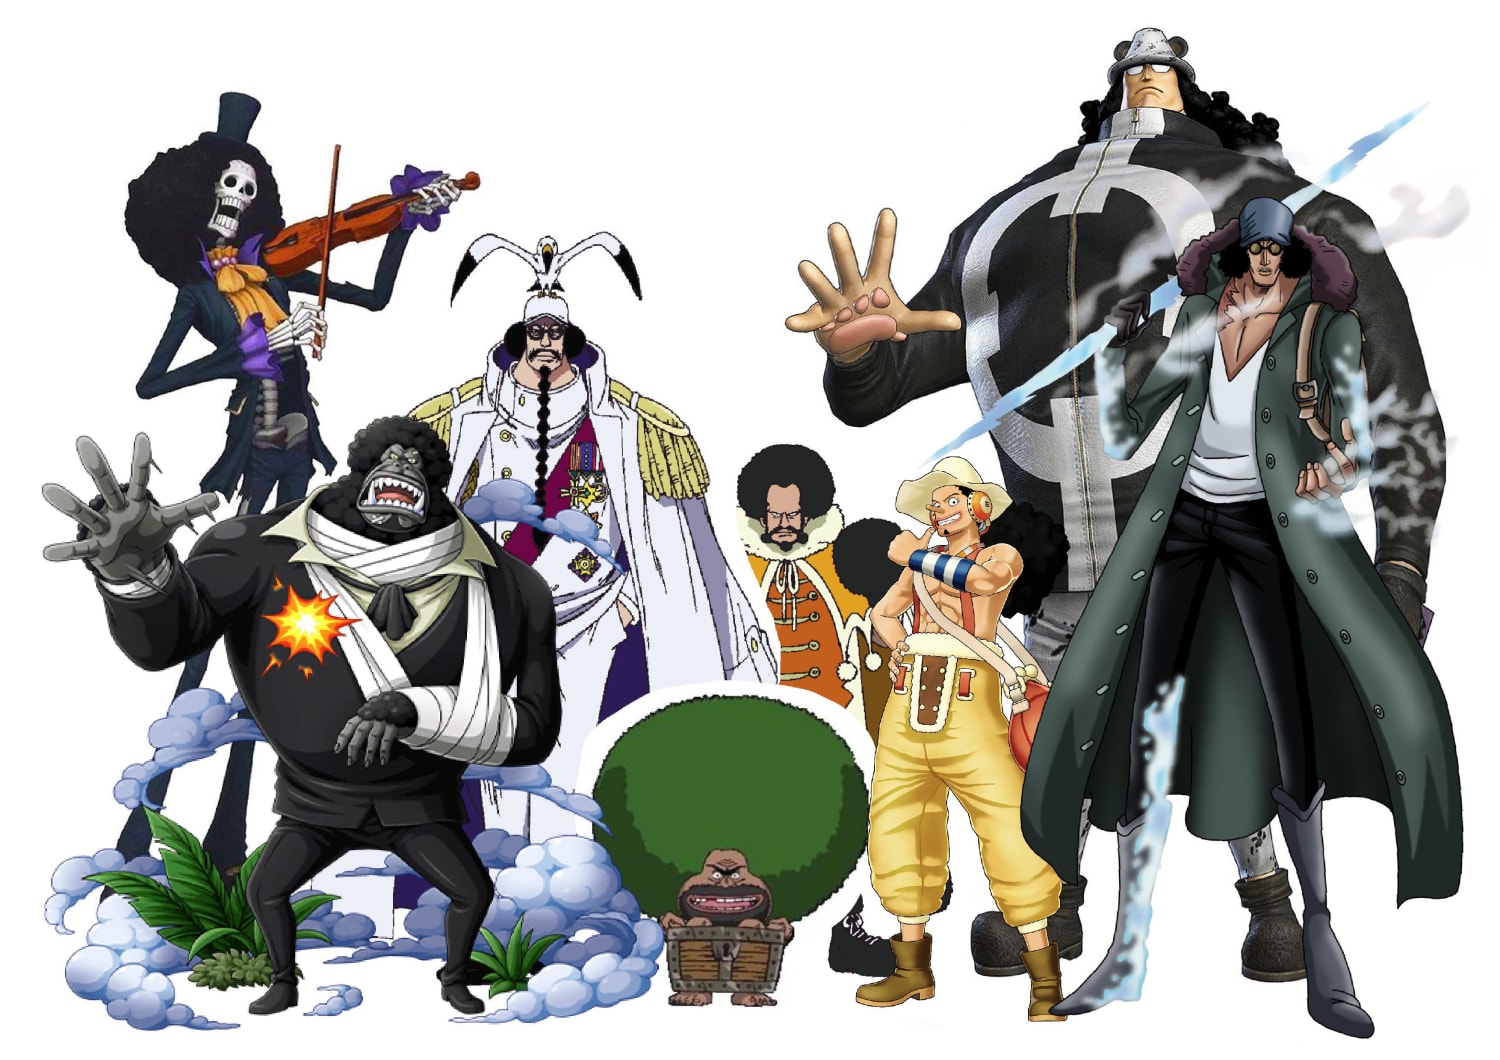 Board at work, so putting together the most powerful people in once piece to create the AFRO PIRATES, this crew is coming for the one piece. Also if I have missed anyone let me know so I can add them in.